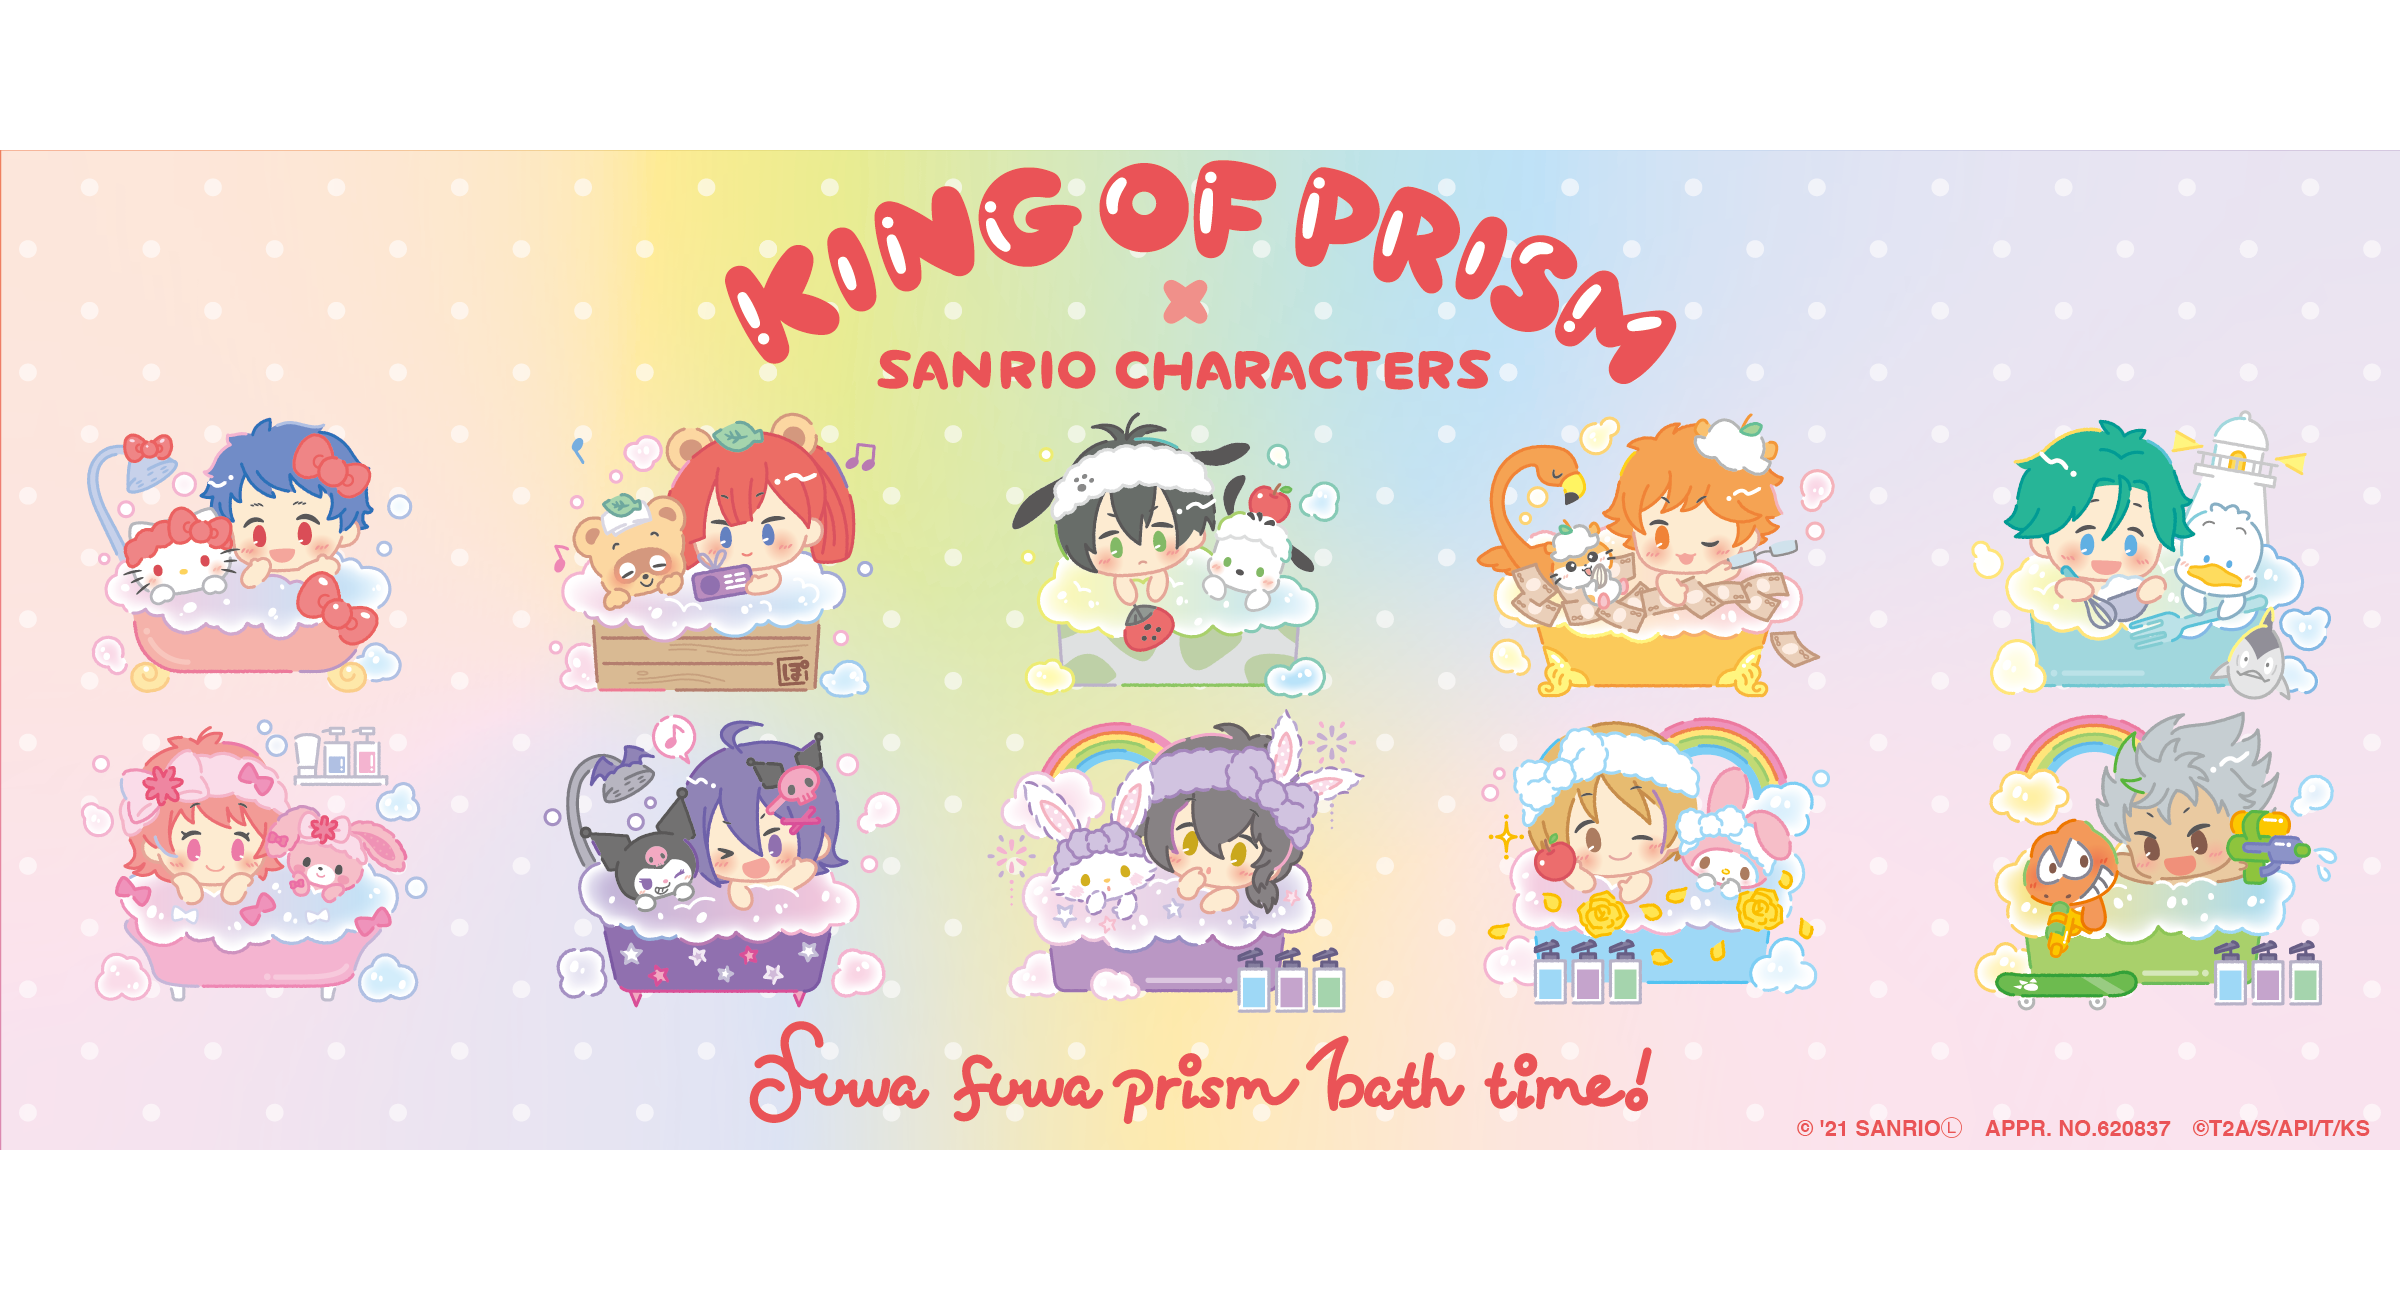 「KING OF PRISM」×「SANRIO CHARACTERS」1